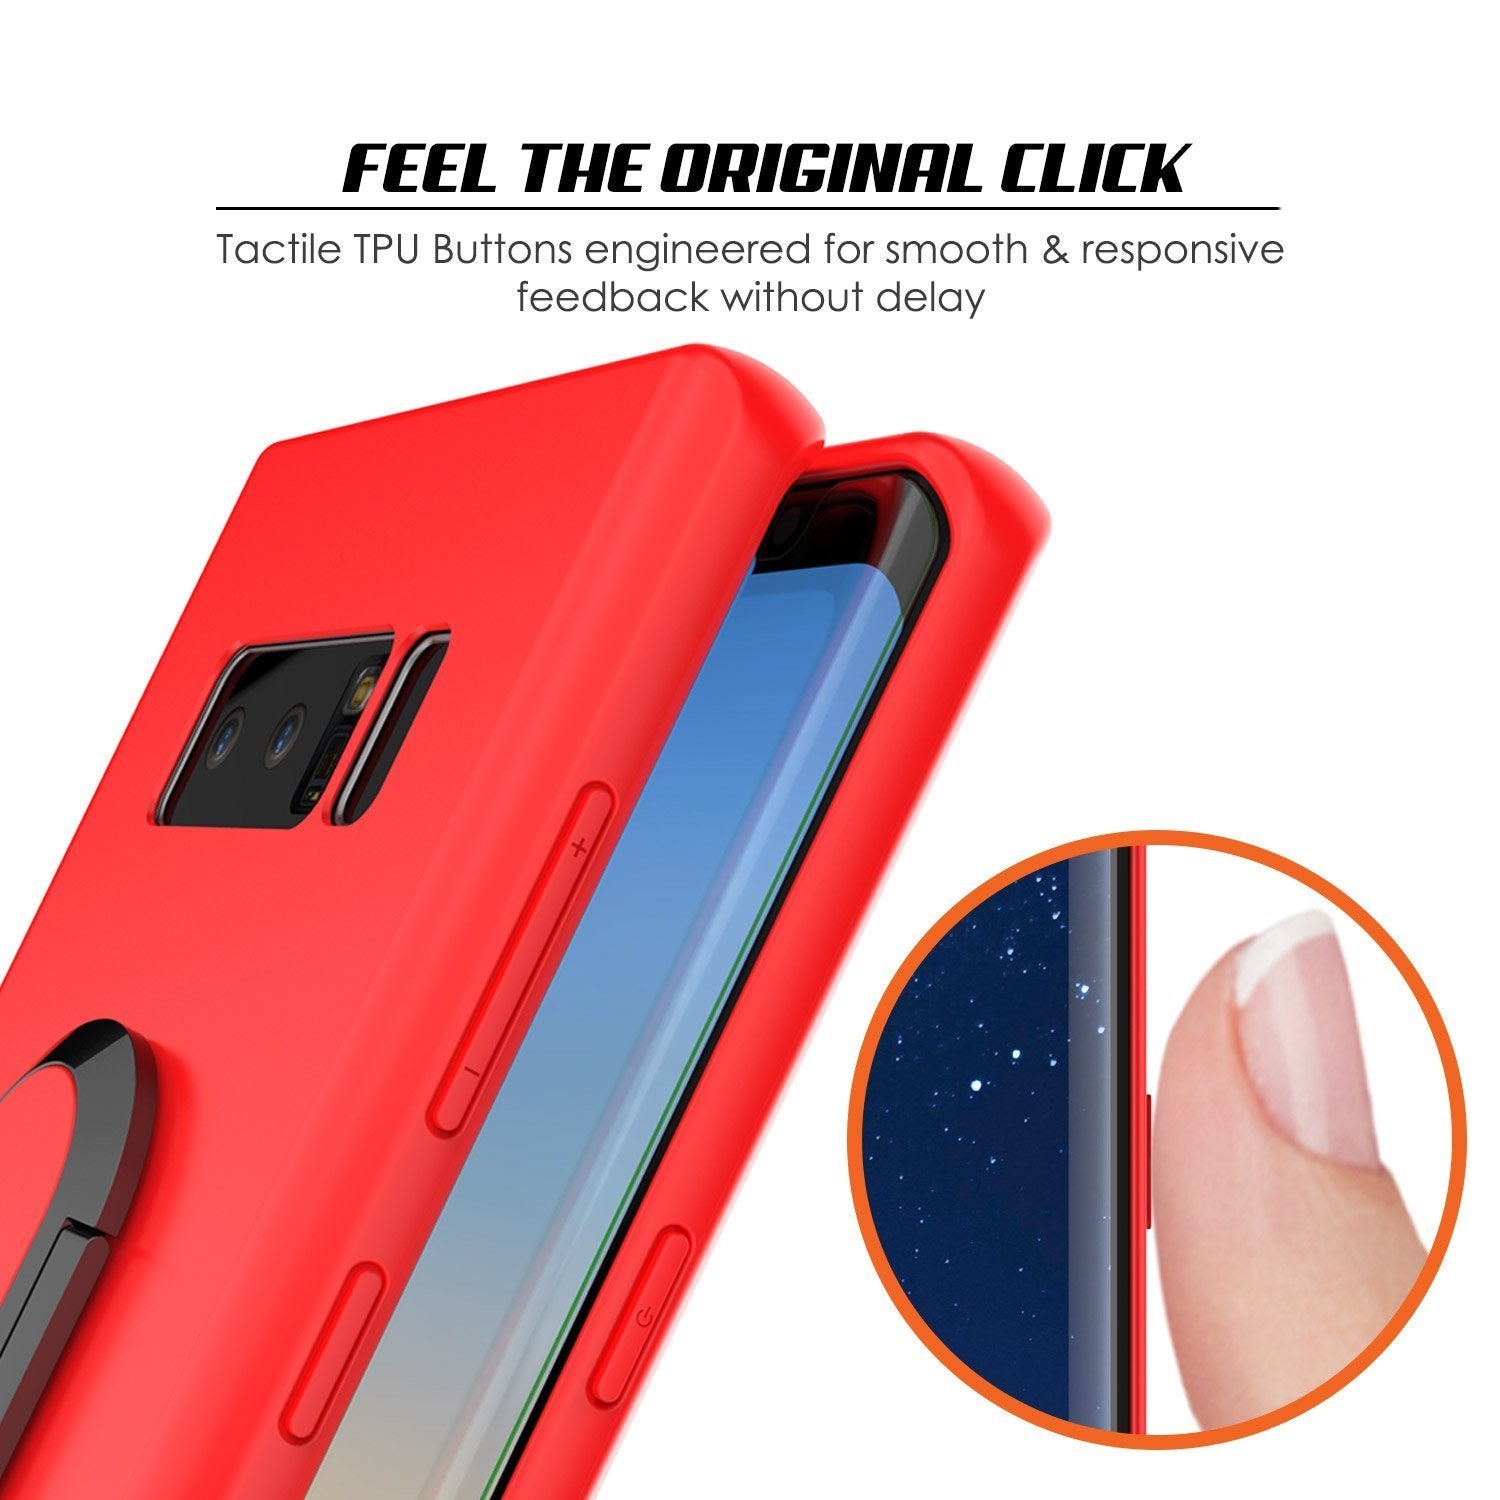 Galaxy Note 8 case Magnetix Protective TPU Cover W/ Kickstand, Red